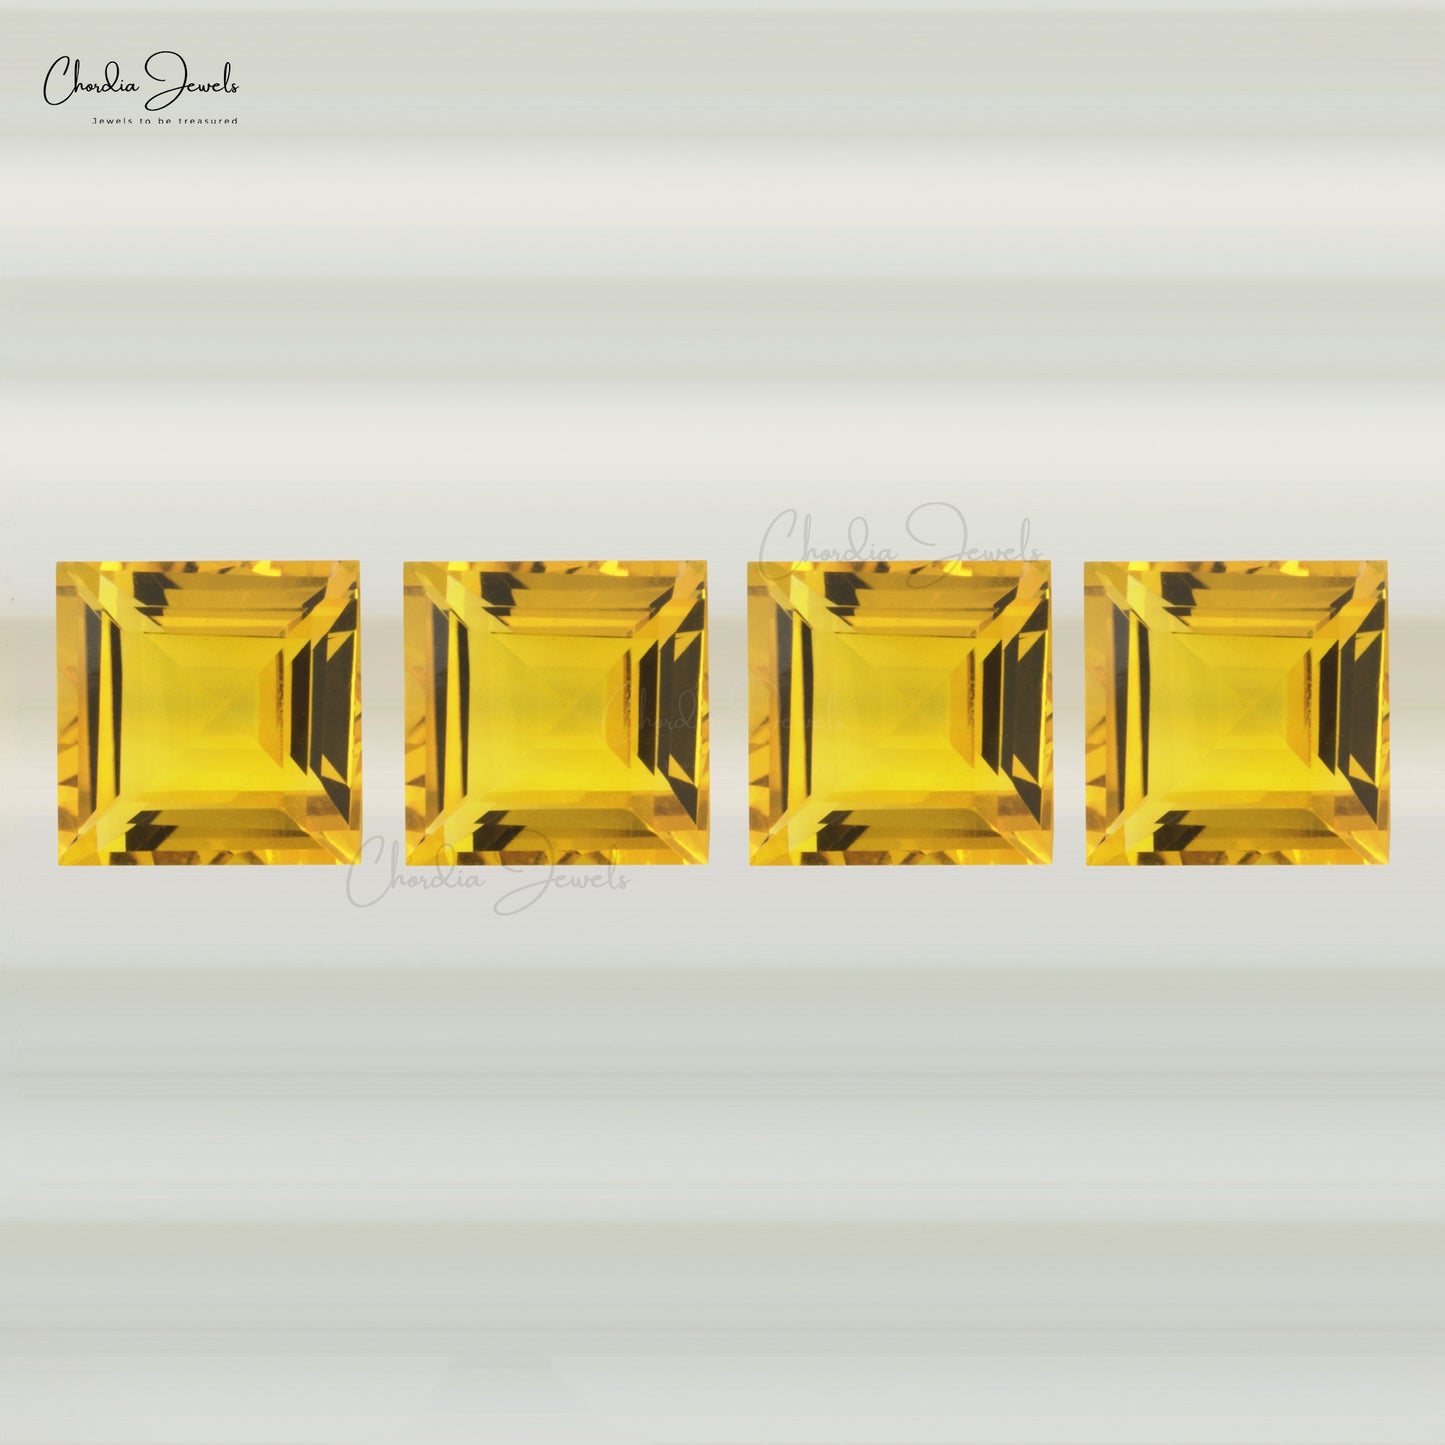 6MM-6.5MM High Grade Citrine Square Loose Gemstone at Wholesale from India, 1 Piece